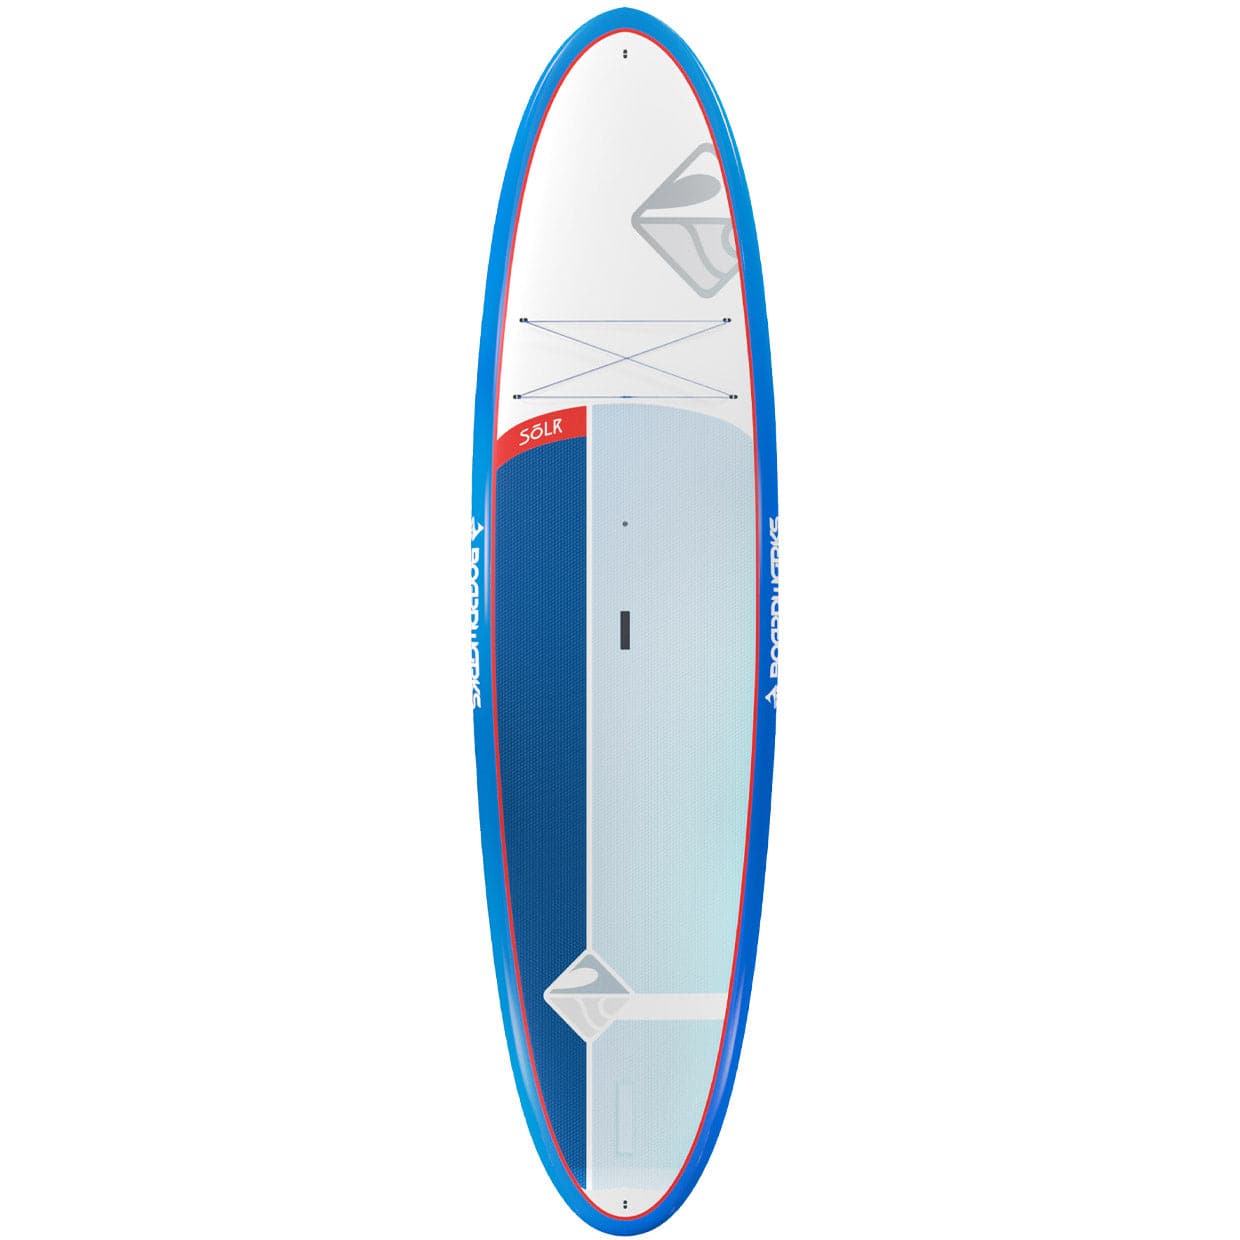 Featuring the Solr 10'6 SUP Package rigid sup manufactured by Boardworks shown here from one angle.